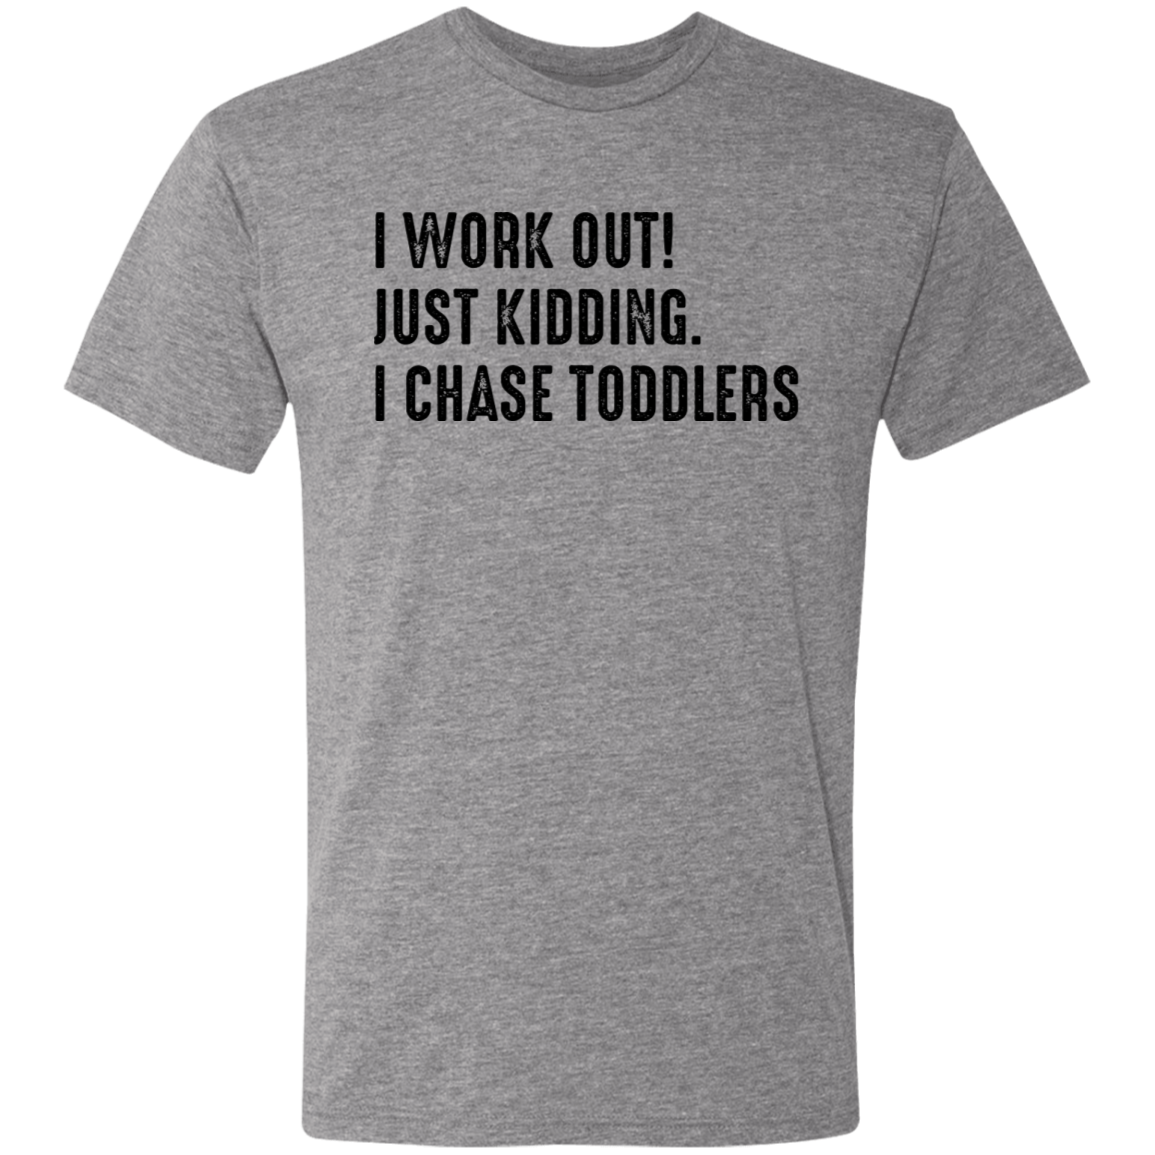 Workout, I chase toddlers CC